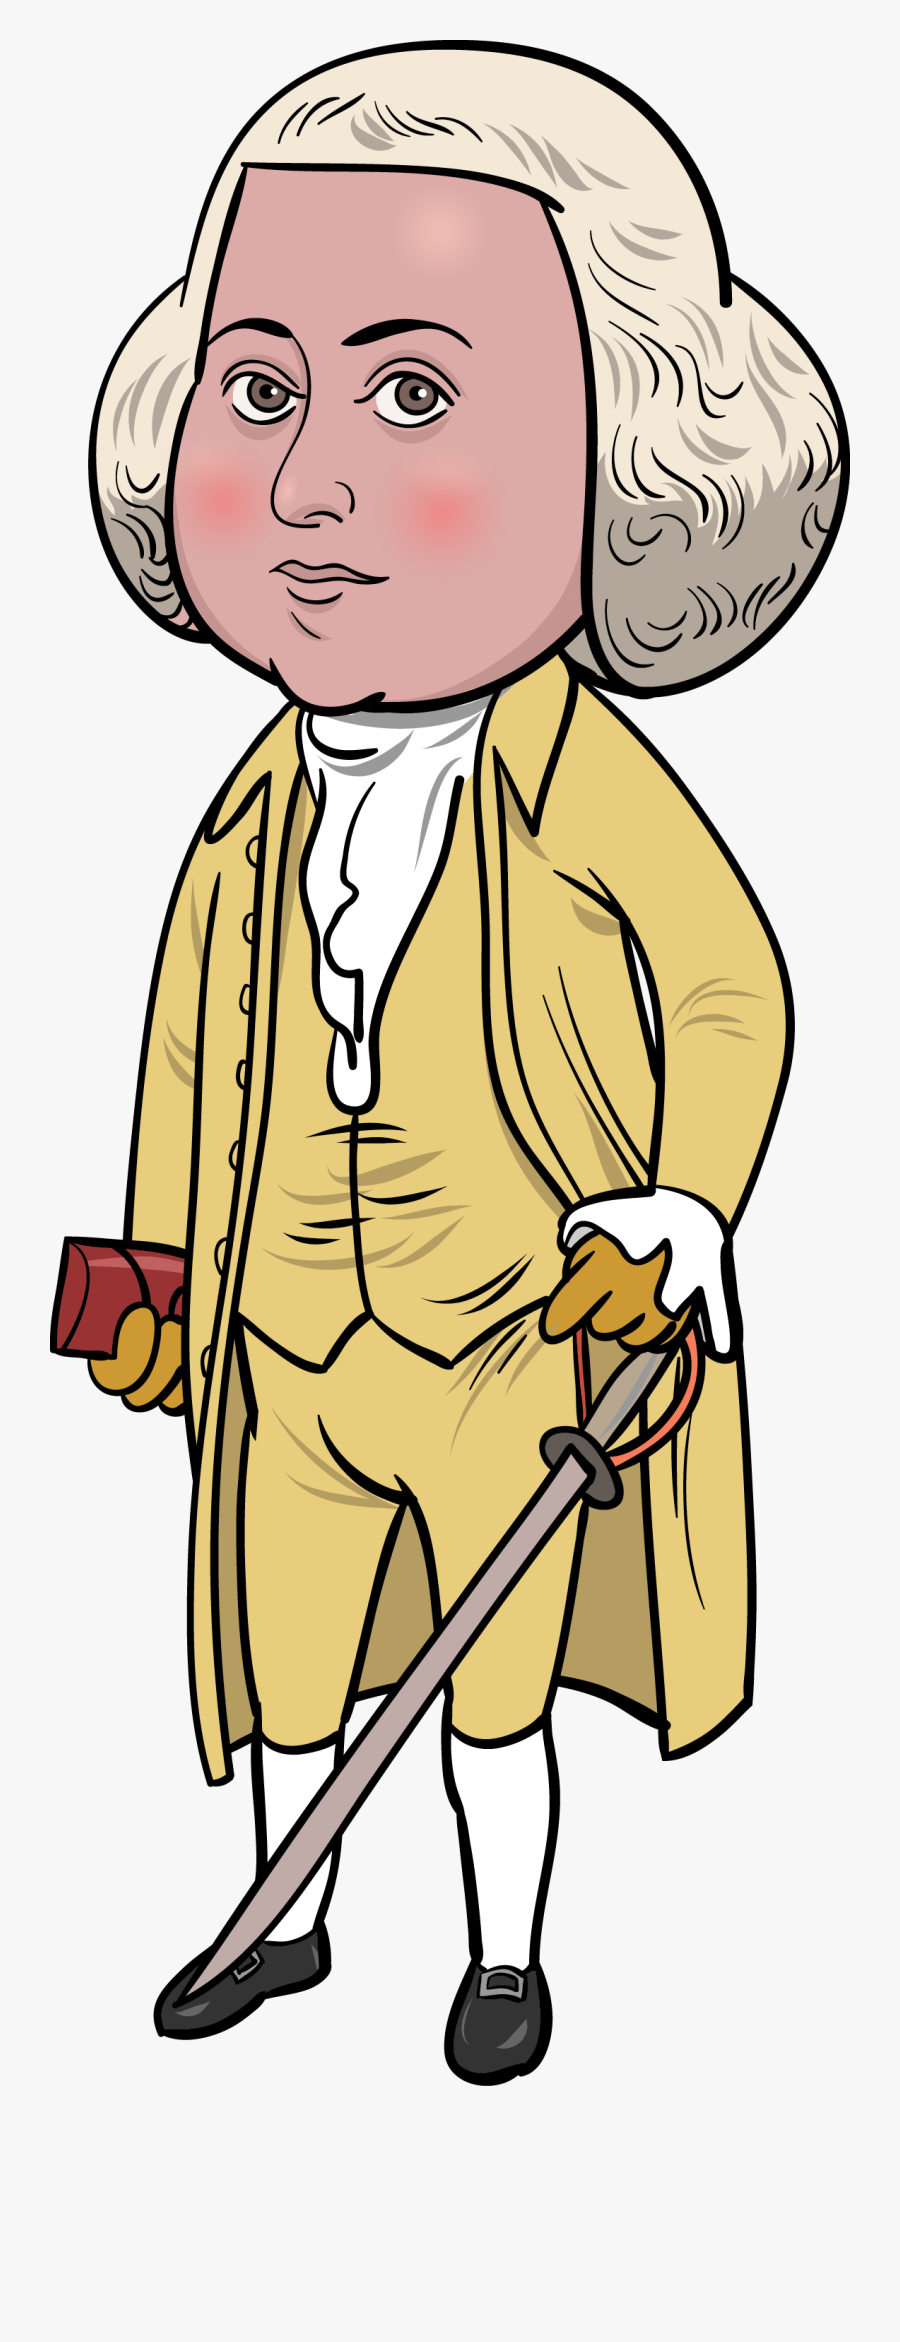 Picture Royalty Free Stock Working For Thus We - John Adams Cartoon Png, Transparent Clipart